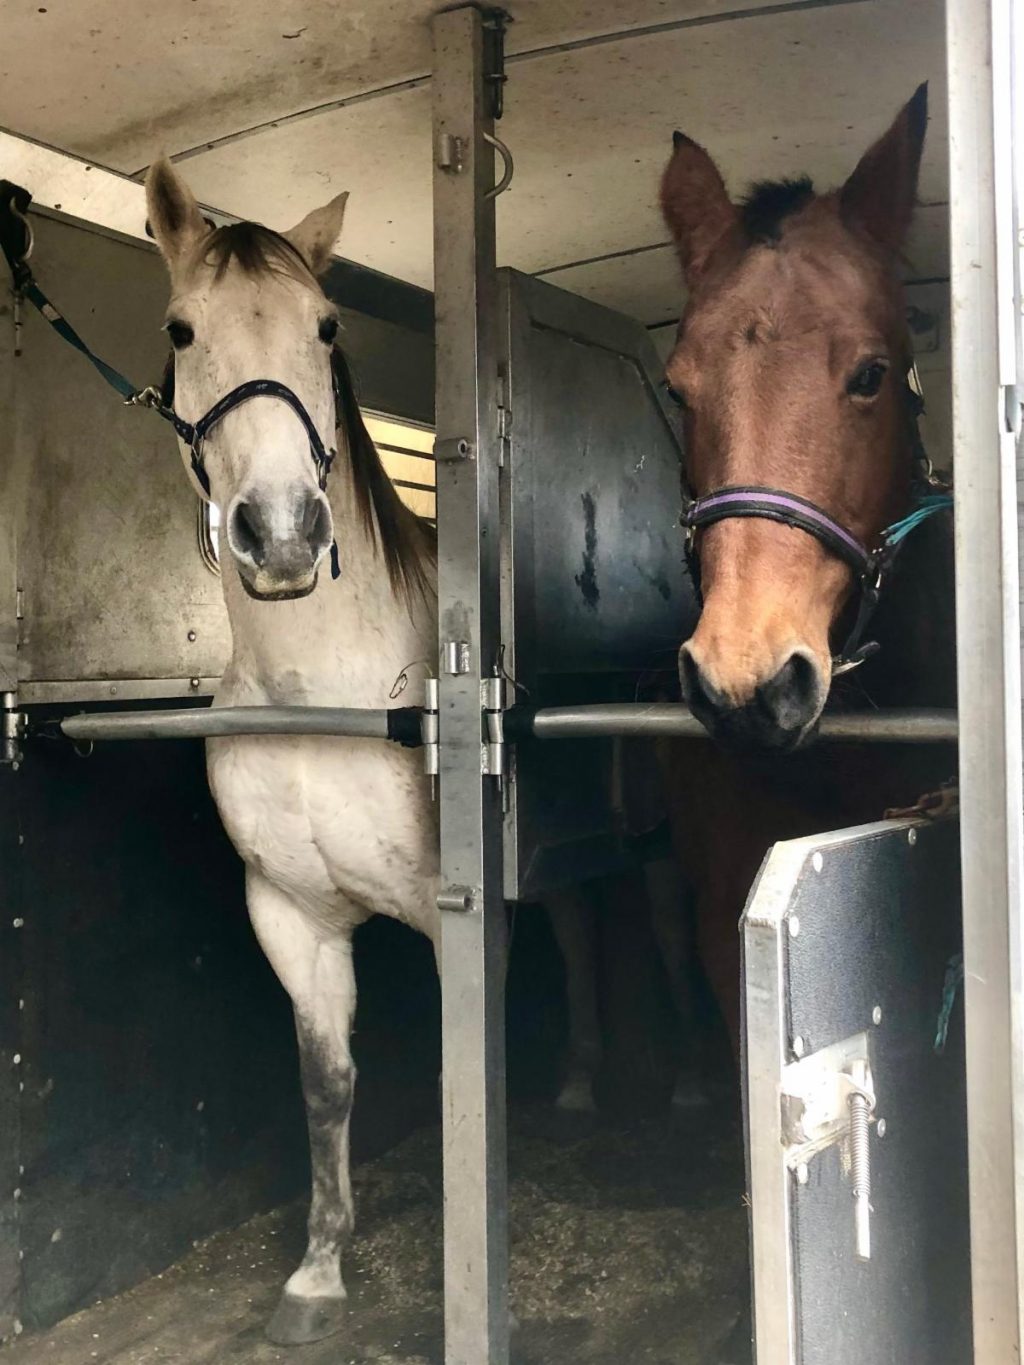 Moon, a gray quarter horse gelding, and Zoom, a registered bay quarter horse mare, inside the horse truck